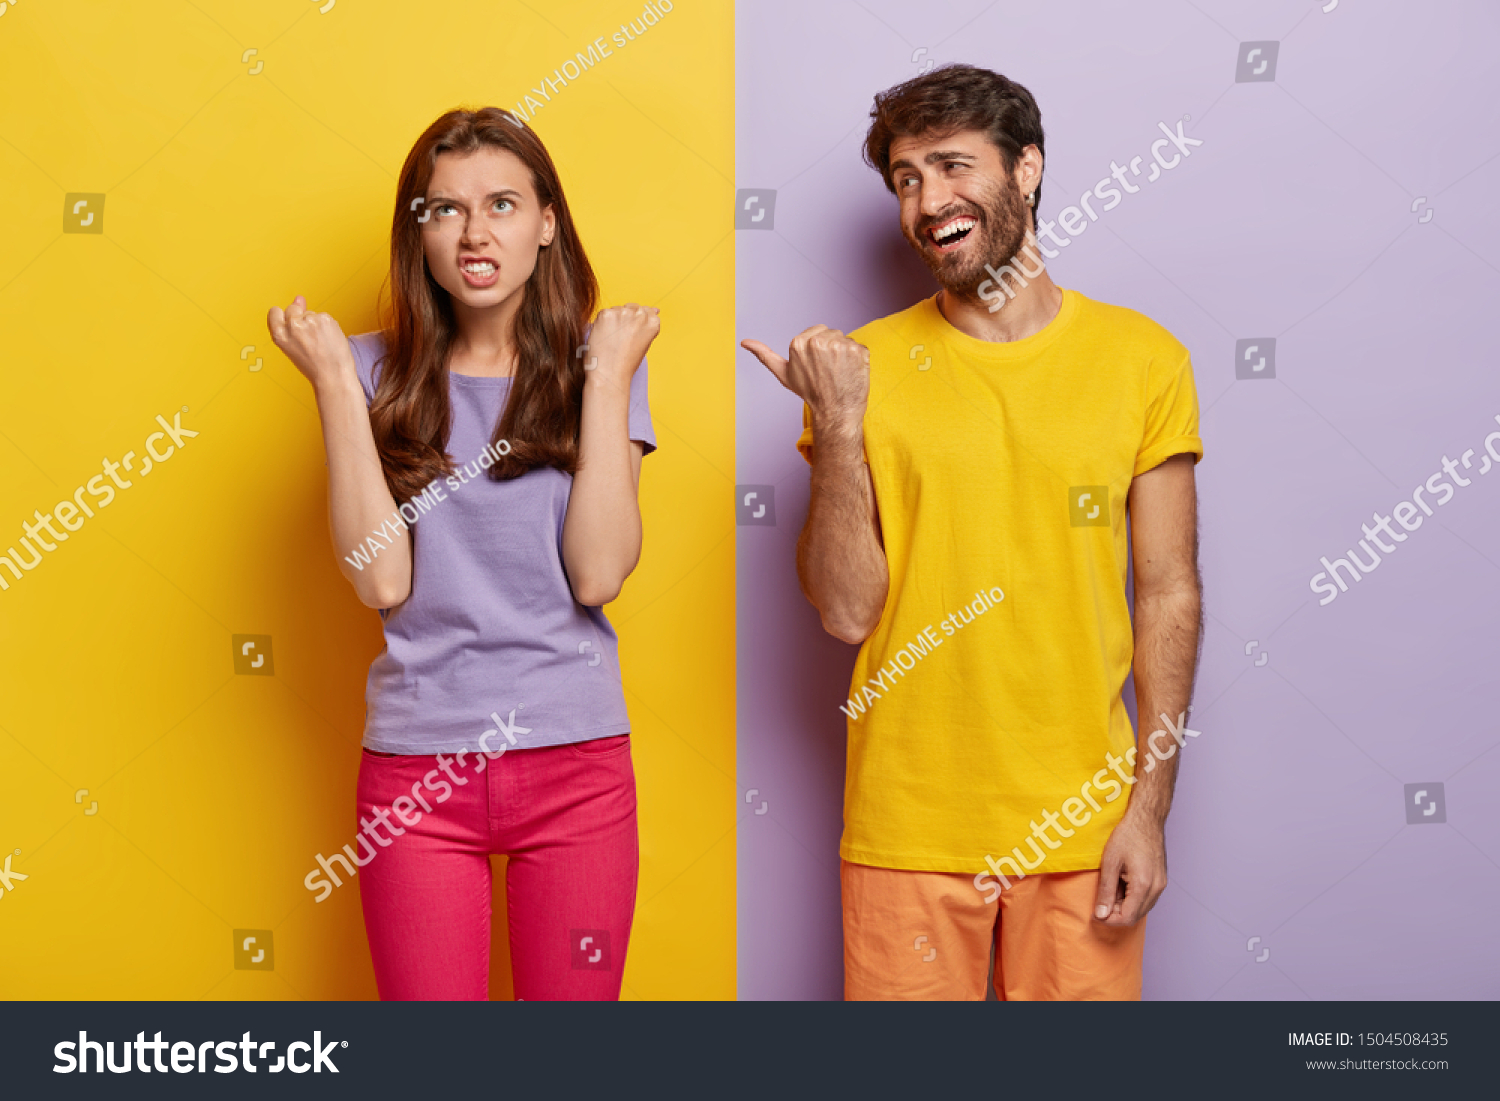 Pleased guy has fun, wears bright yellow t shirt, points thumb at irritated girlfriend who clenches fists with anger, expresses negative emotions, stand in studio against colorful background. Feelings #1504508435